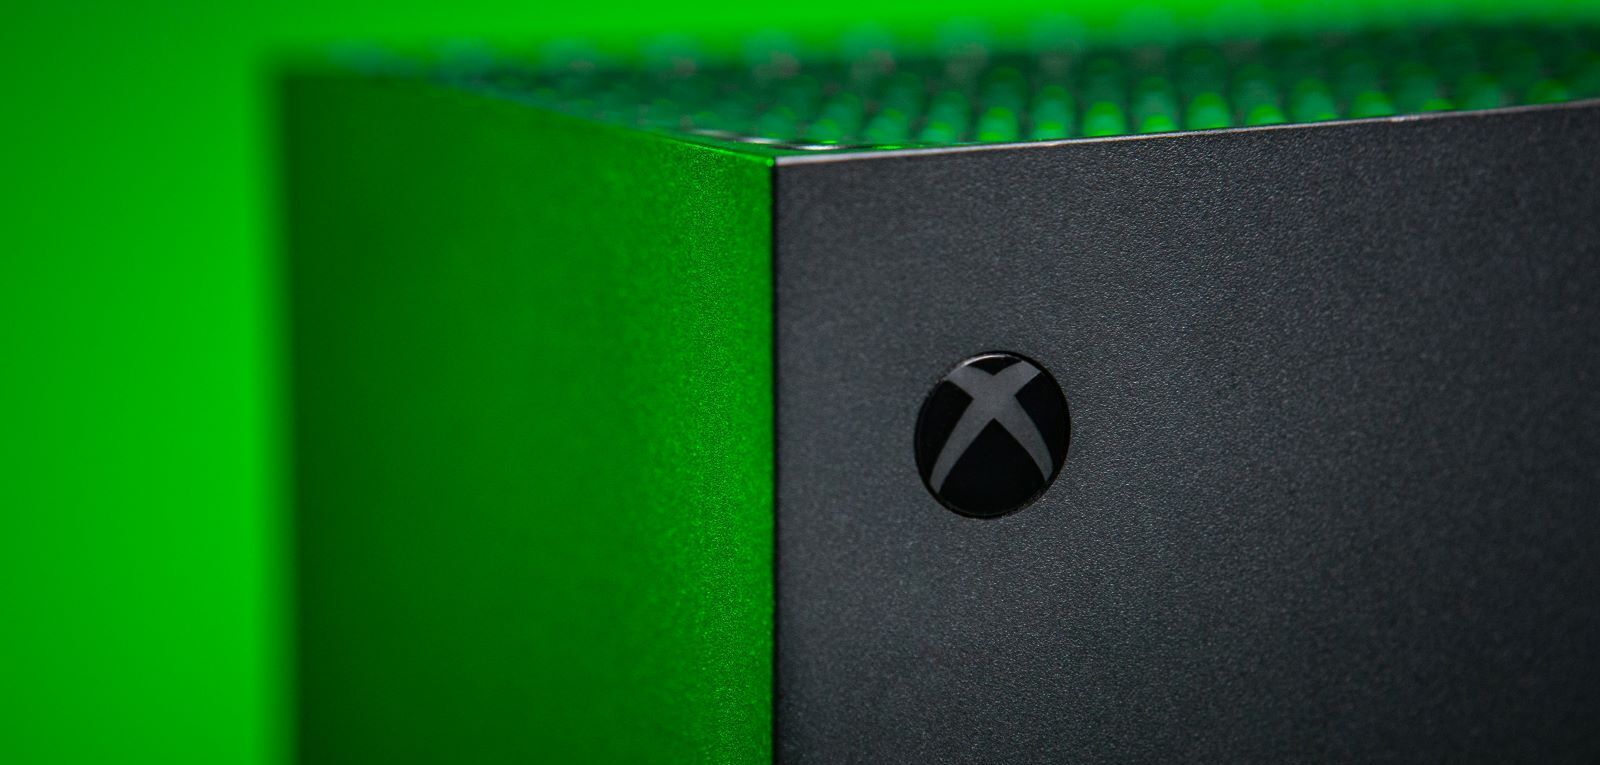 A photo of the power button on an Xbox Series X with a green background